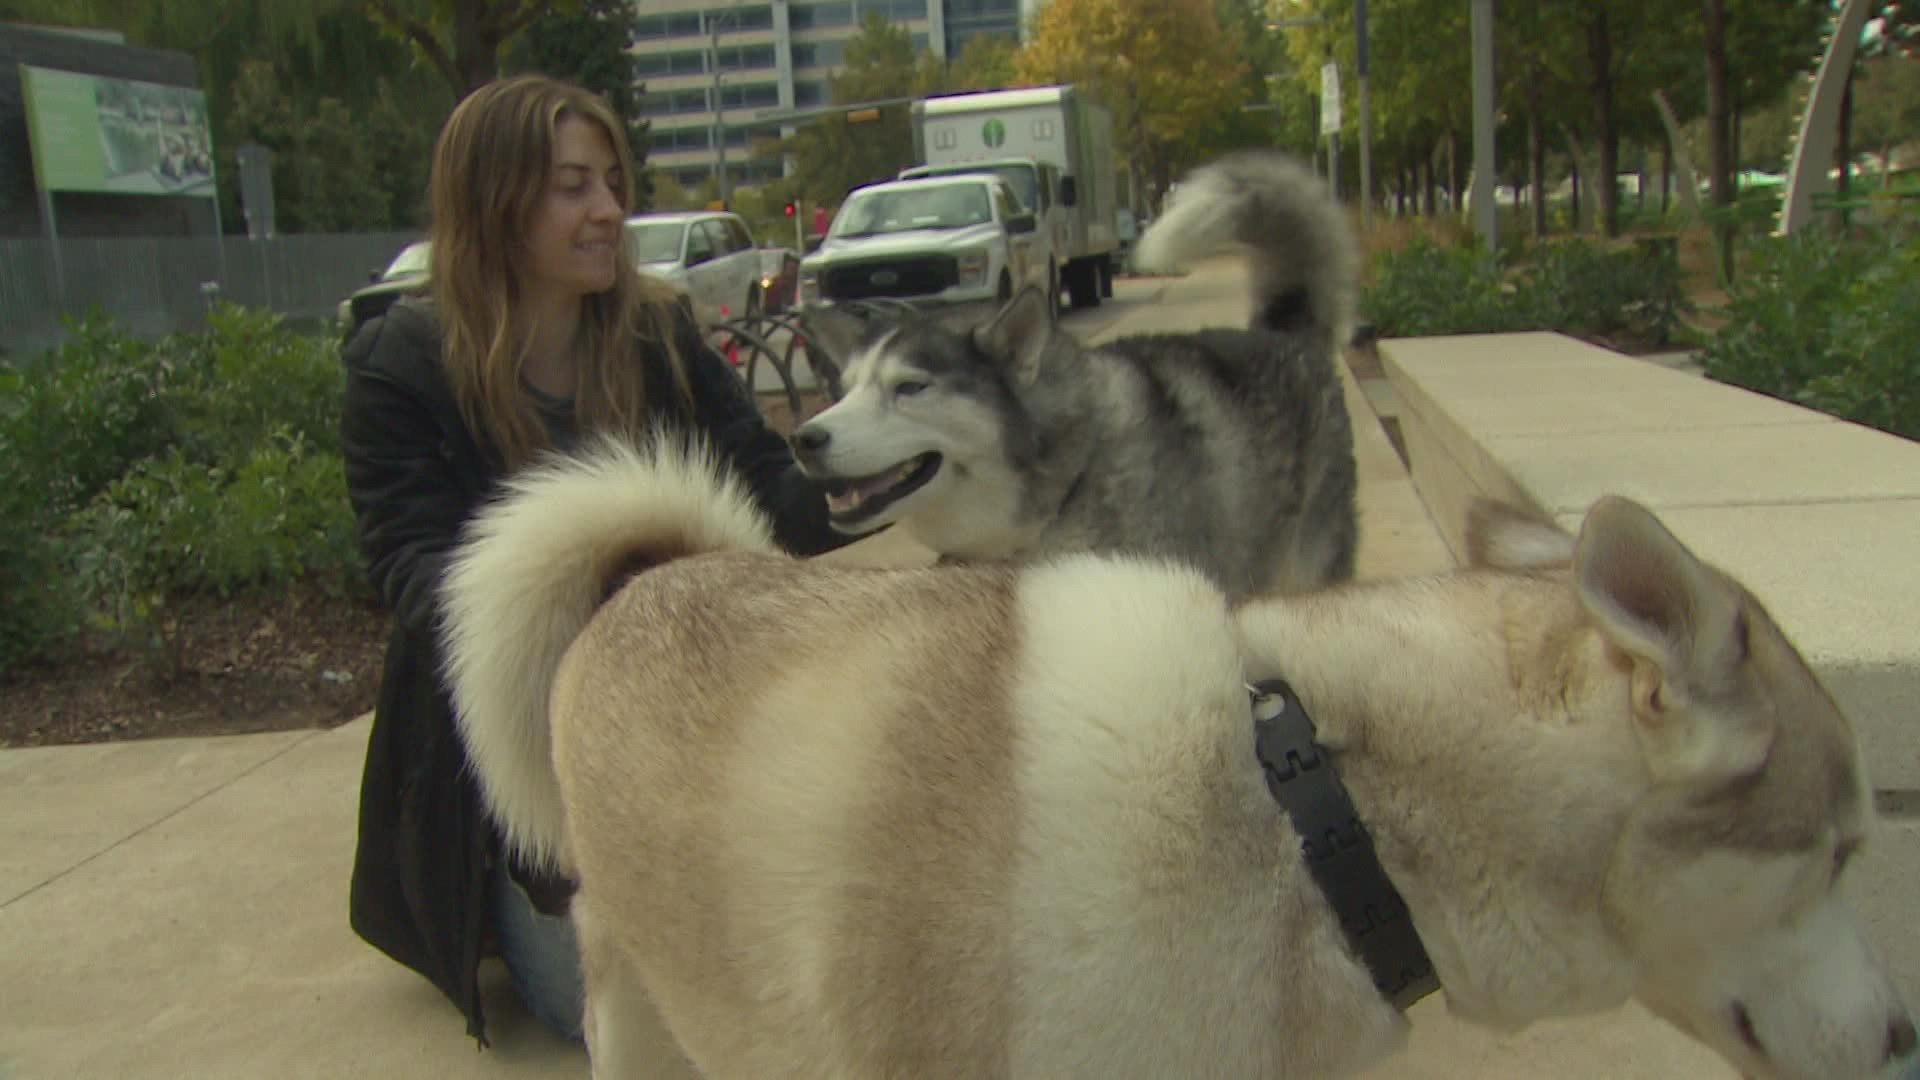 From family to friends to fur babies, Dallasites at Klyde Warren Park share their thanks with WFAA's Greg Fields.